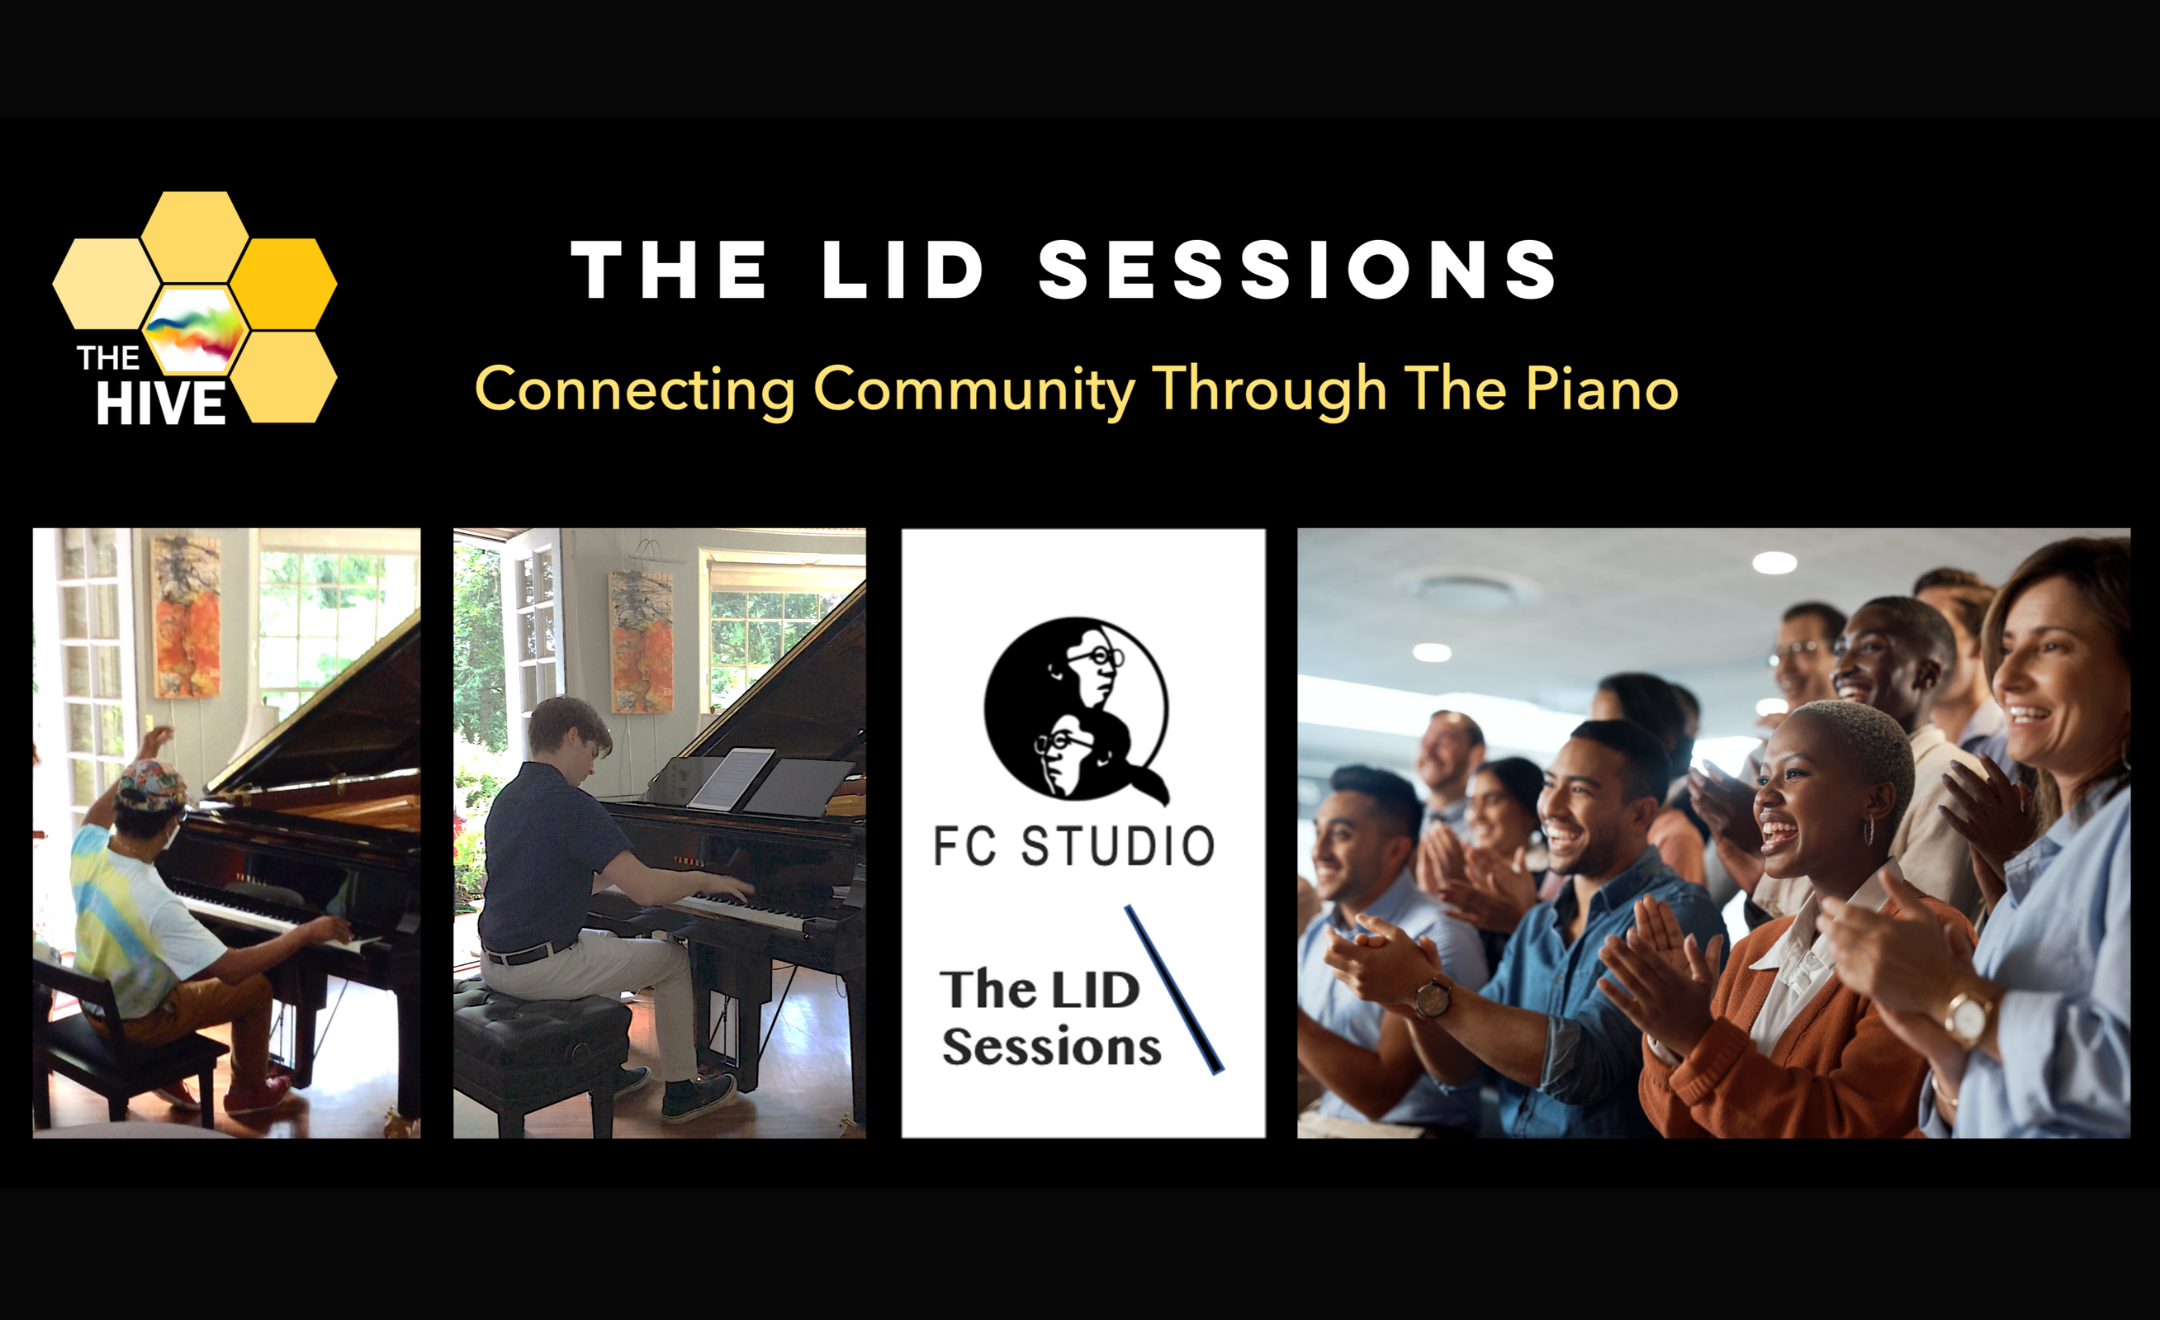 The HIVE: LID Sessions